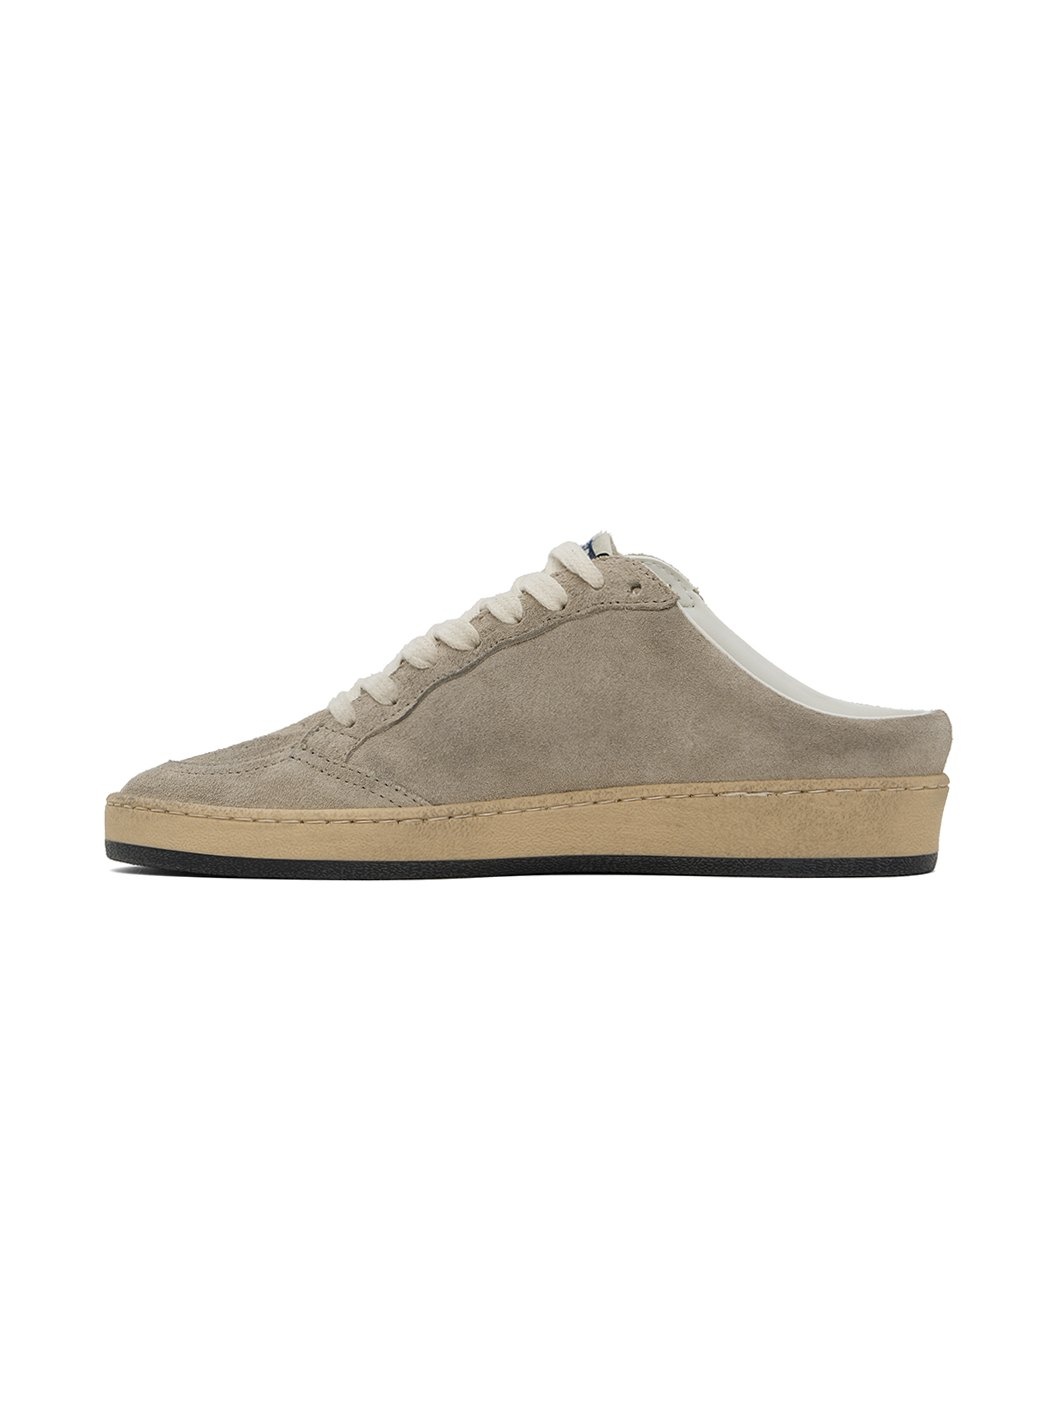 Taupe Ball Star Sabot Sneakers - 3